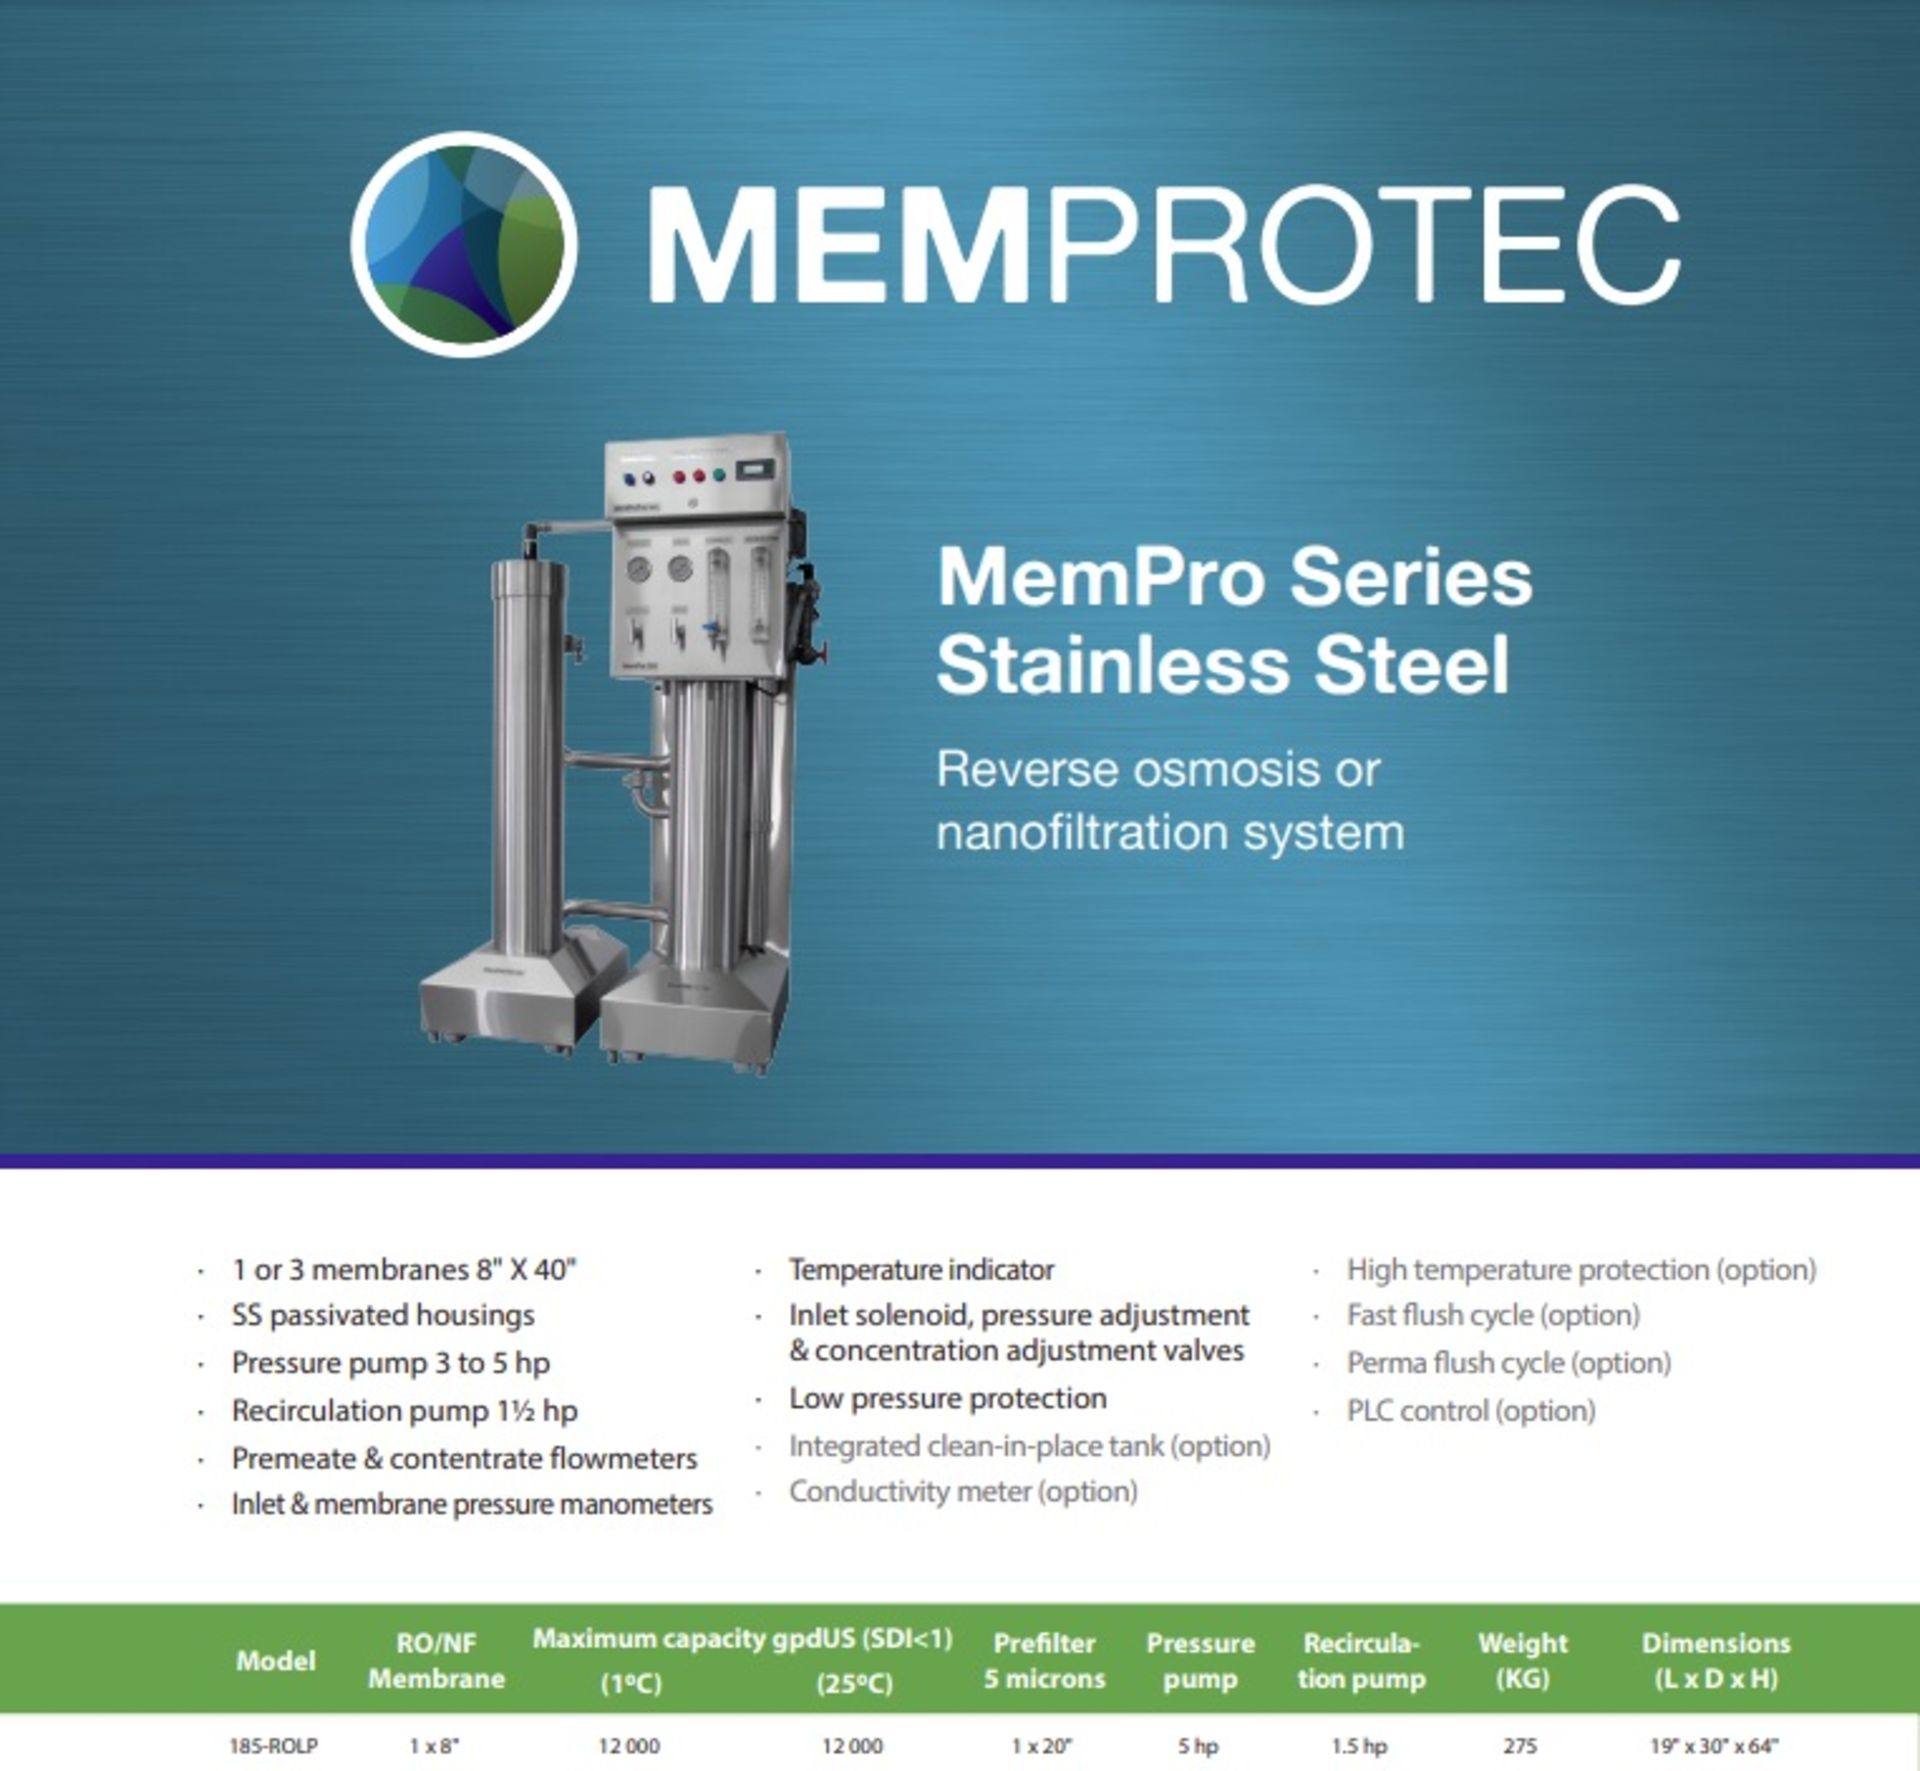 MemPro Series Stainless Steel Reverse osmosis or nanofiltration system Model:185-ROLP - Image 2 of 13